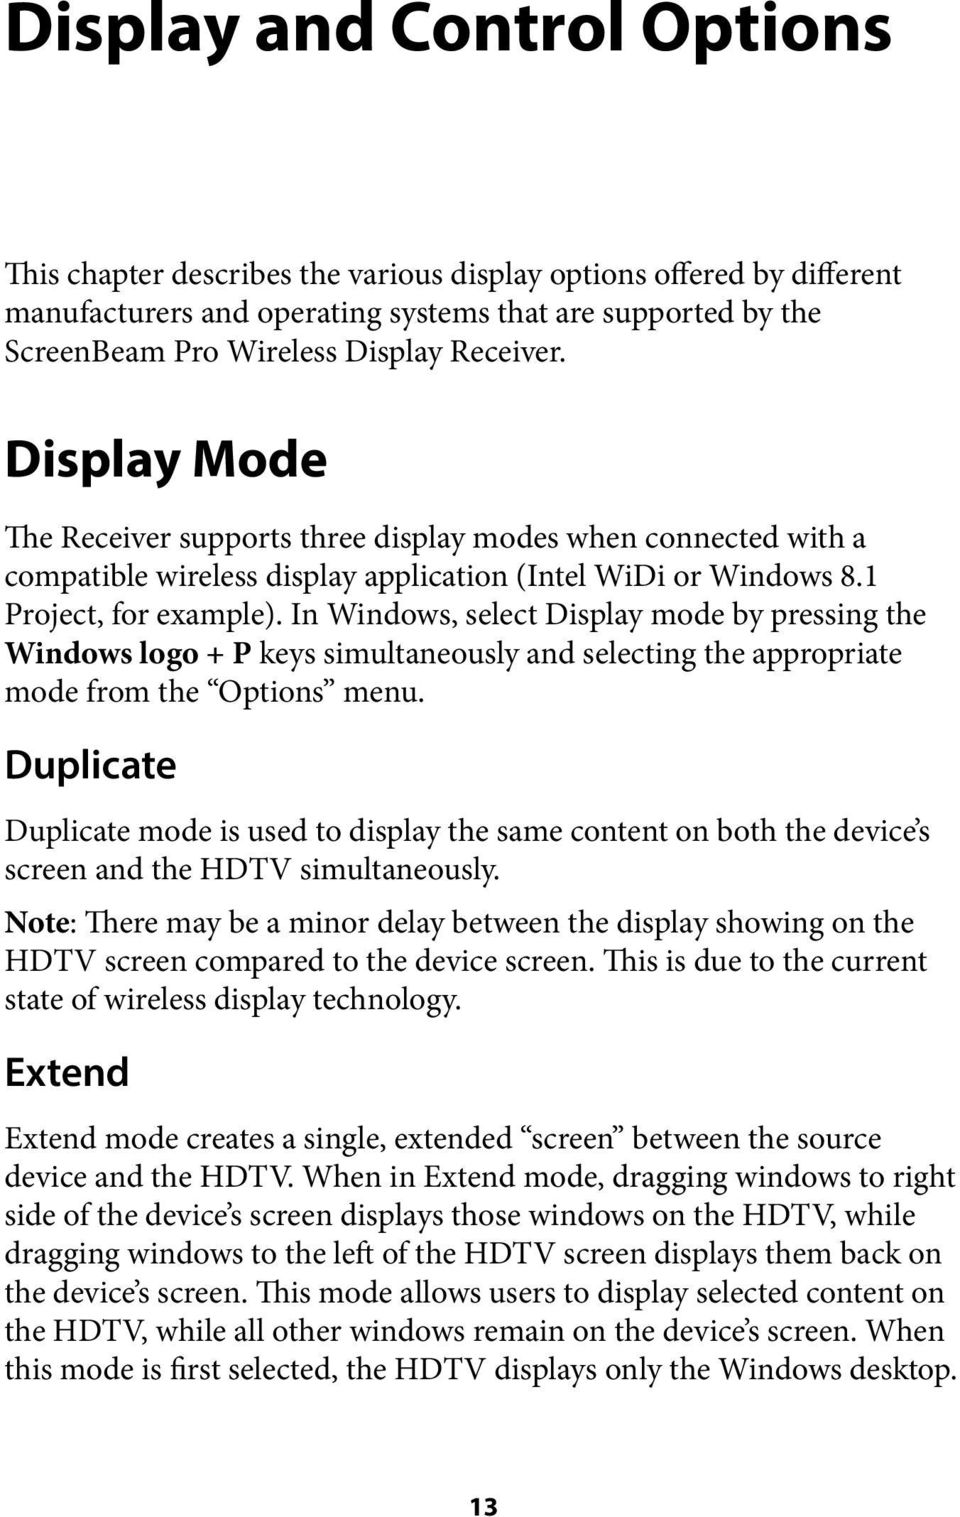 In Windows, select Display mode by pressing the Windows logo + P keys simultaneously and selecting the appropriate mode from the Options menu.